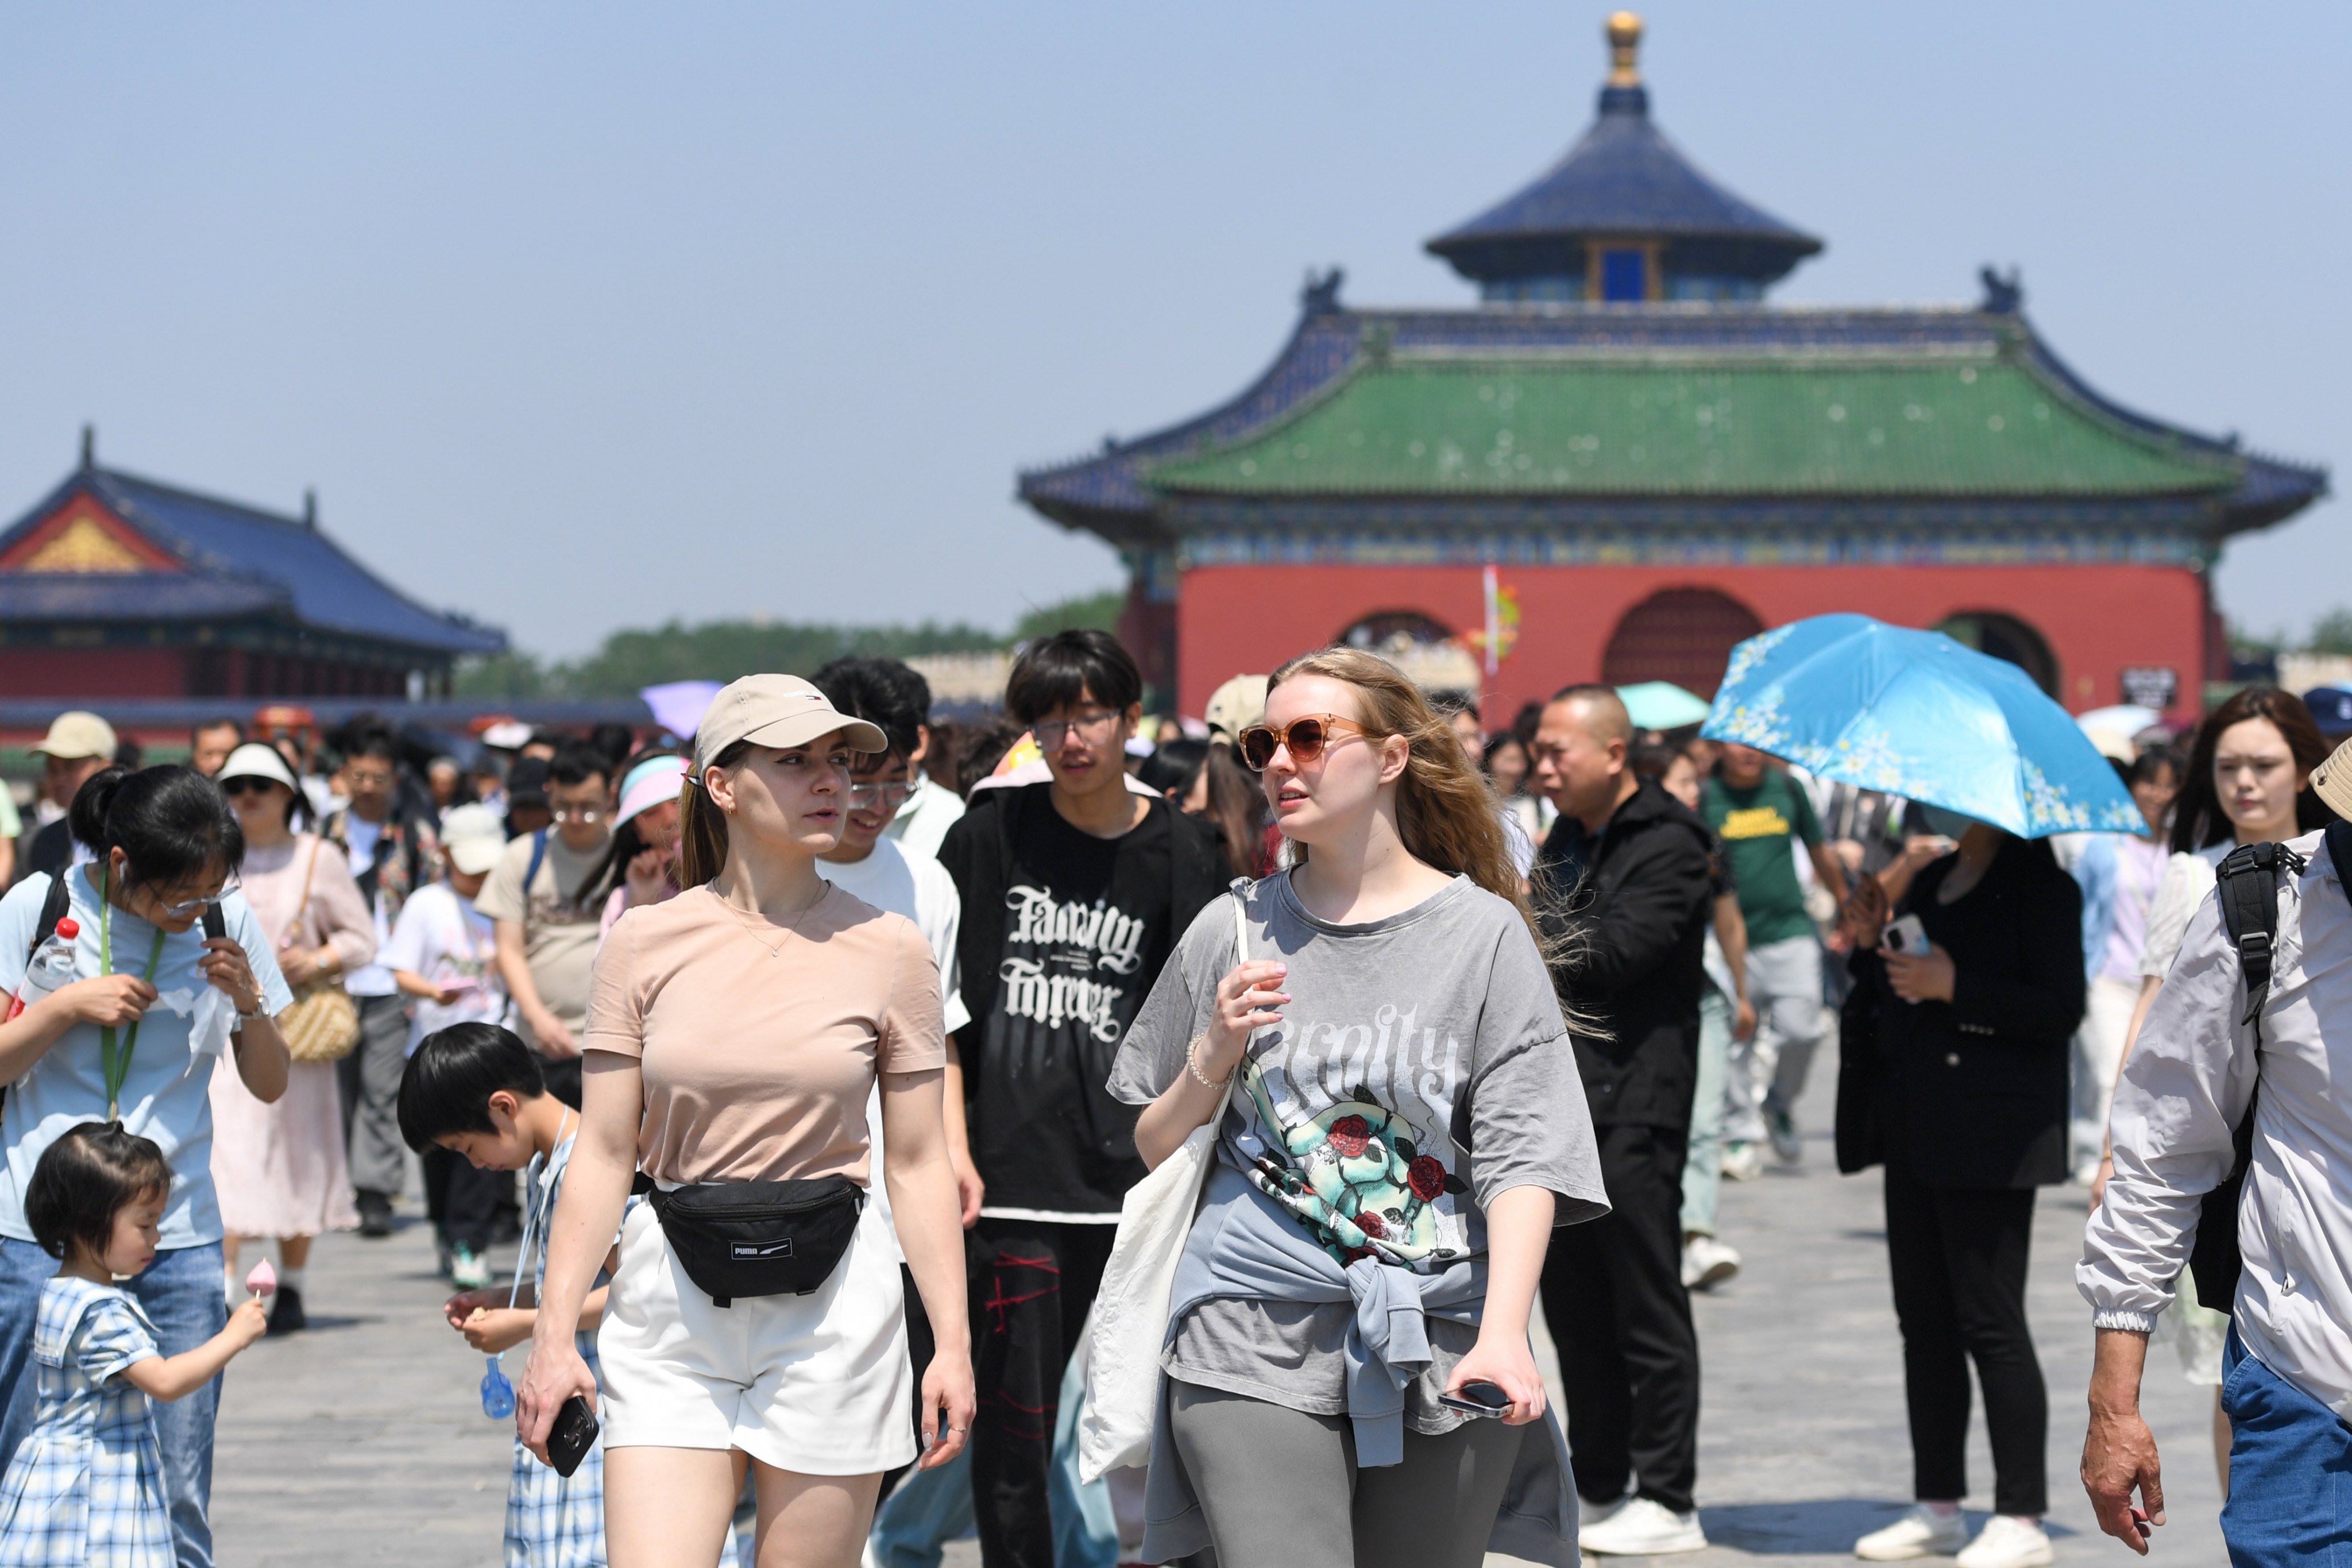 Restrictions were eased in an effort to attract more foreign visitors to the country. Photo: Xinhua